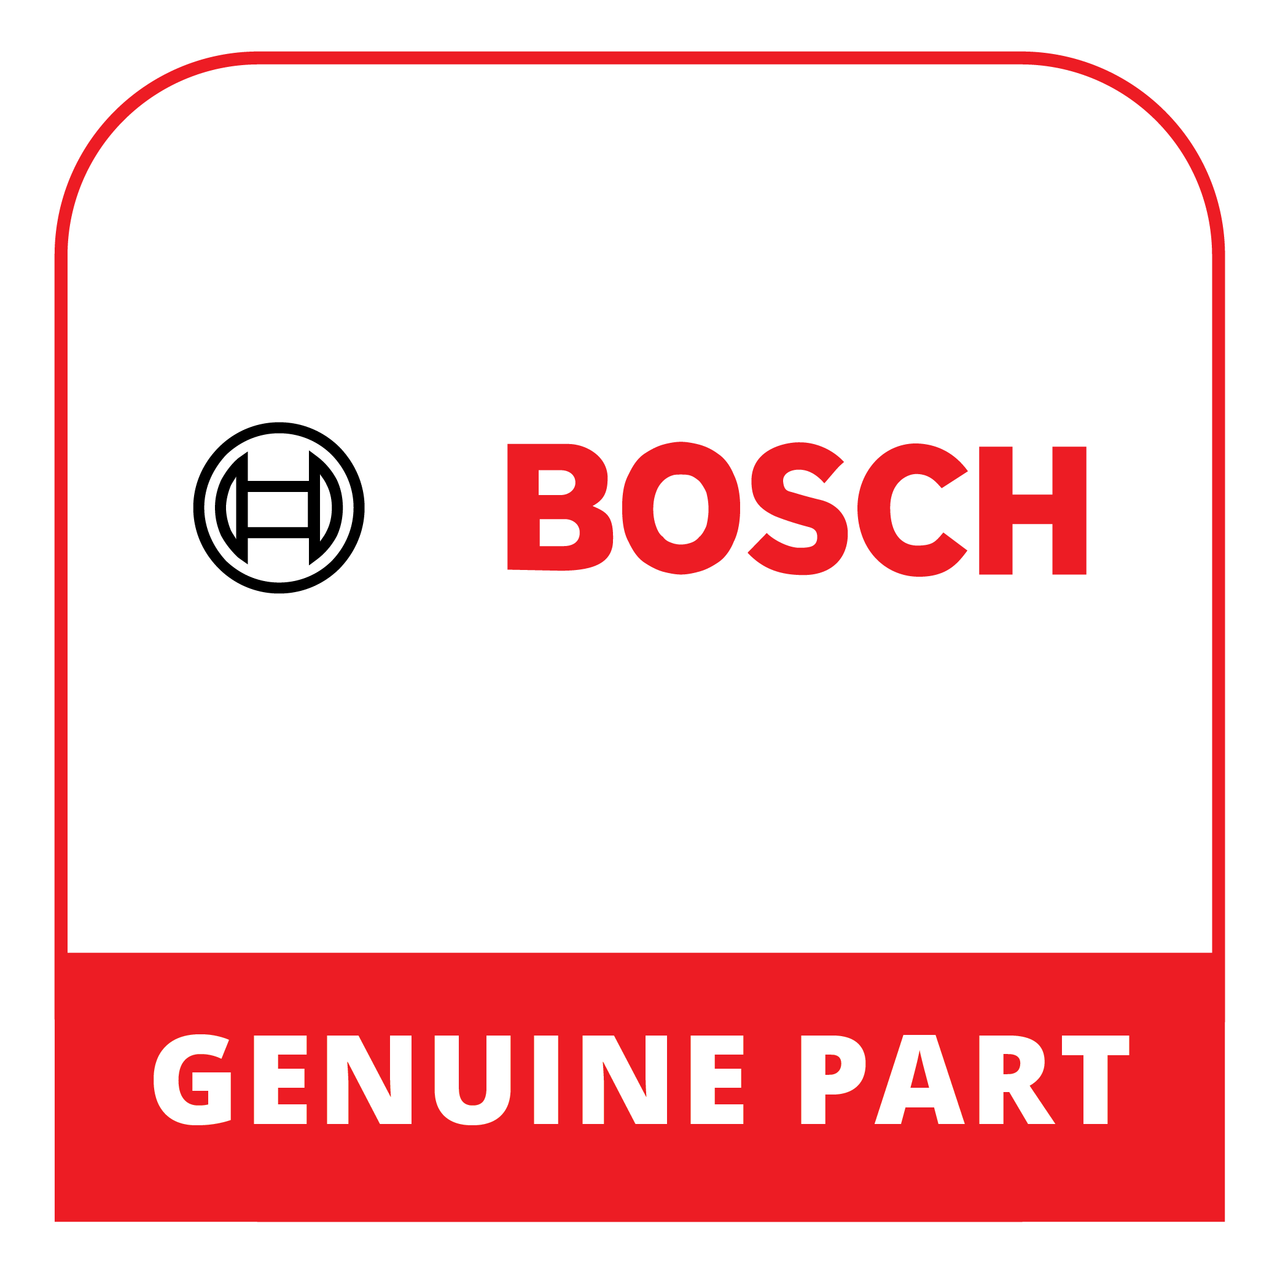 Bosch (Thermador) 10014194 - Thermocouple - Genuine Bosch (Thermador) Part